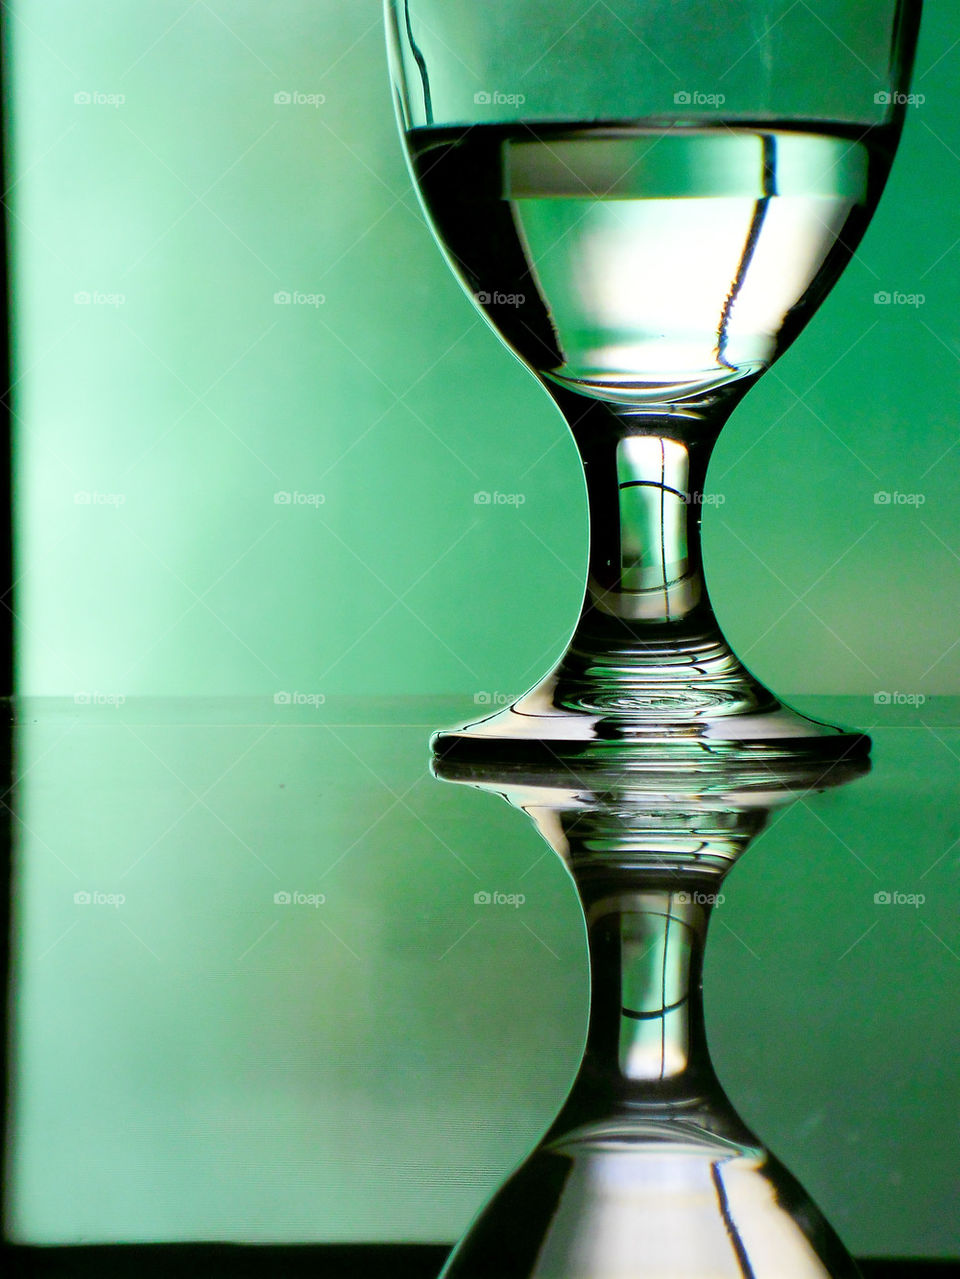 water in water glass or goblet on a reflective table